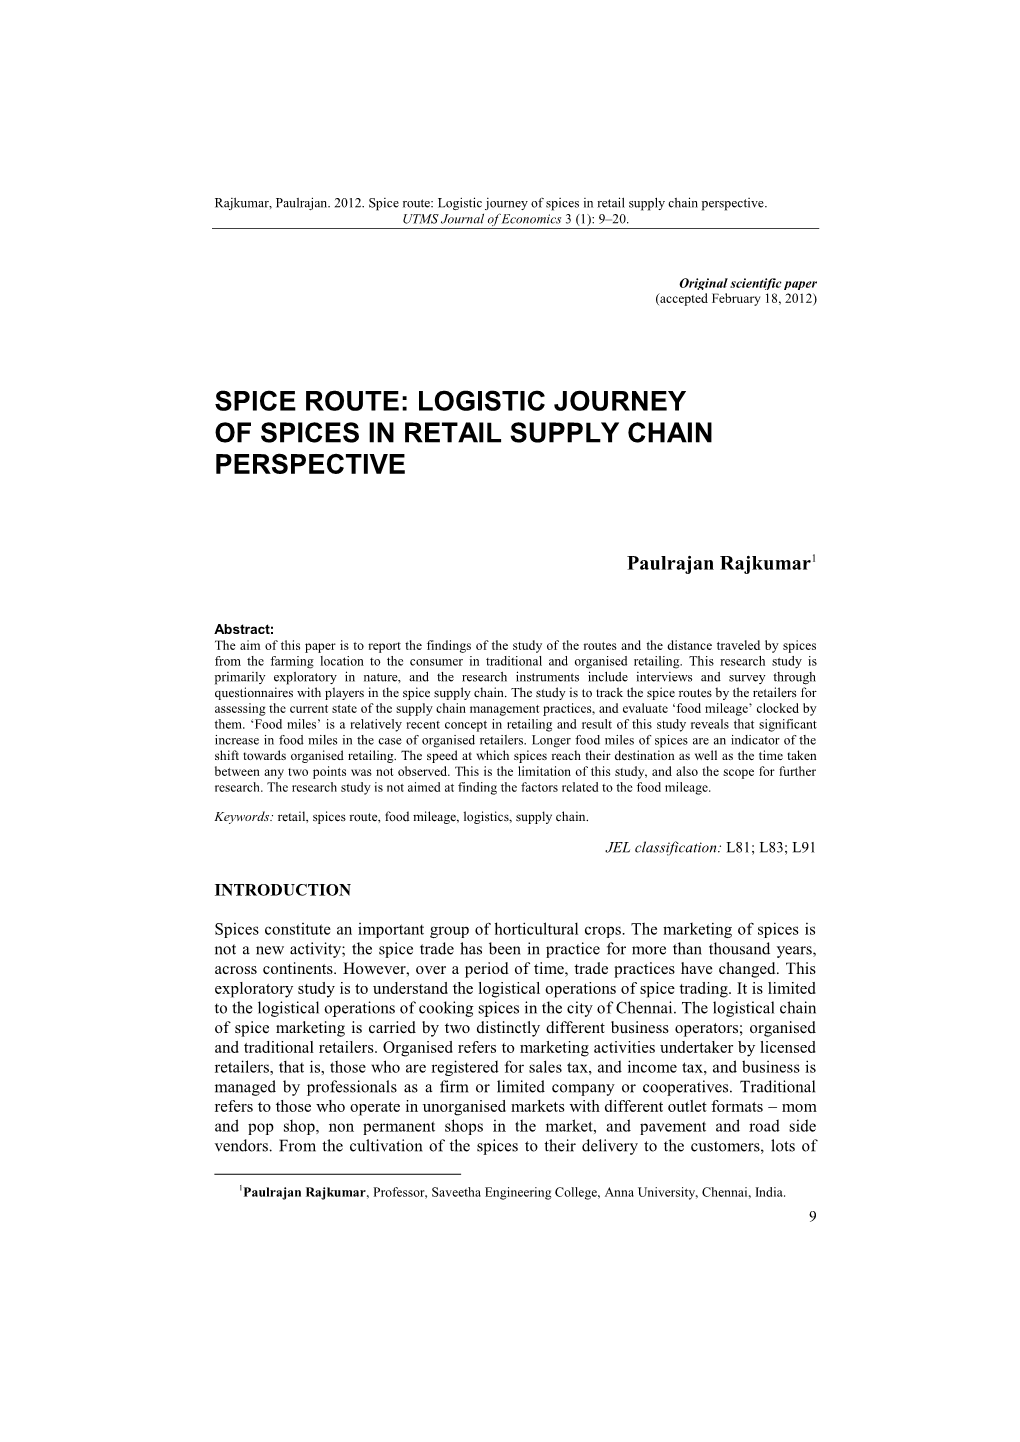 Logistic Journey of Spices in Retail Supply Chain Perspective